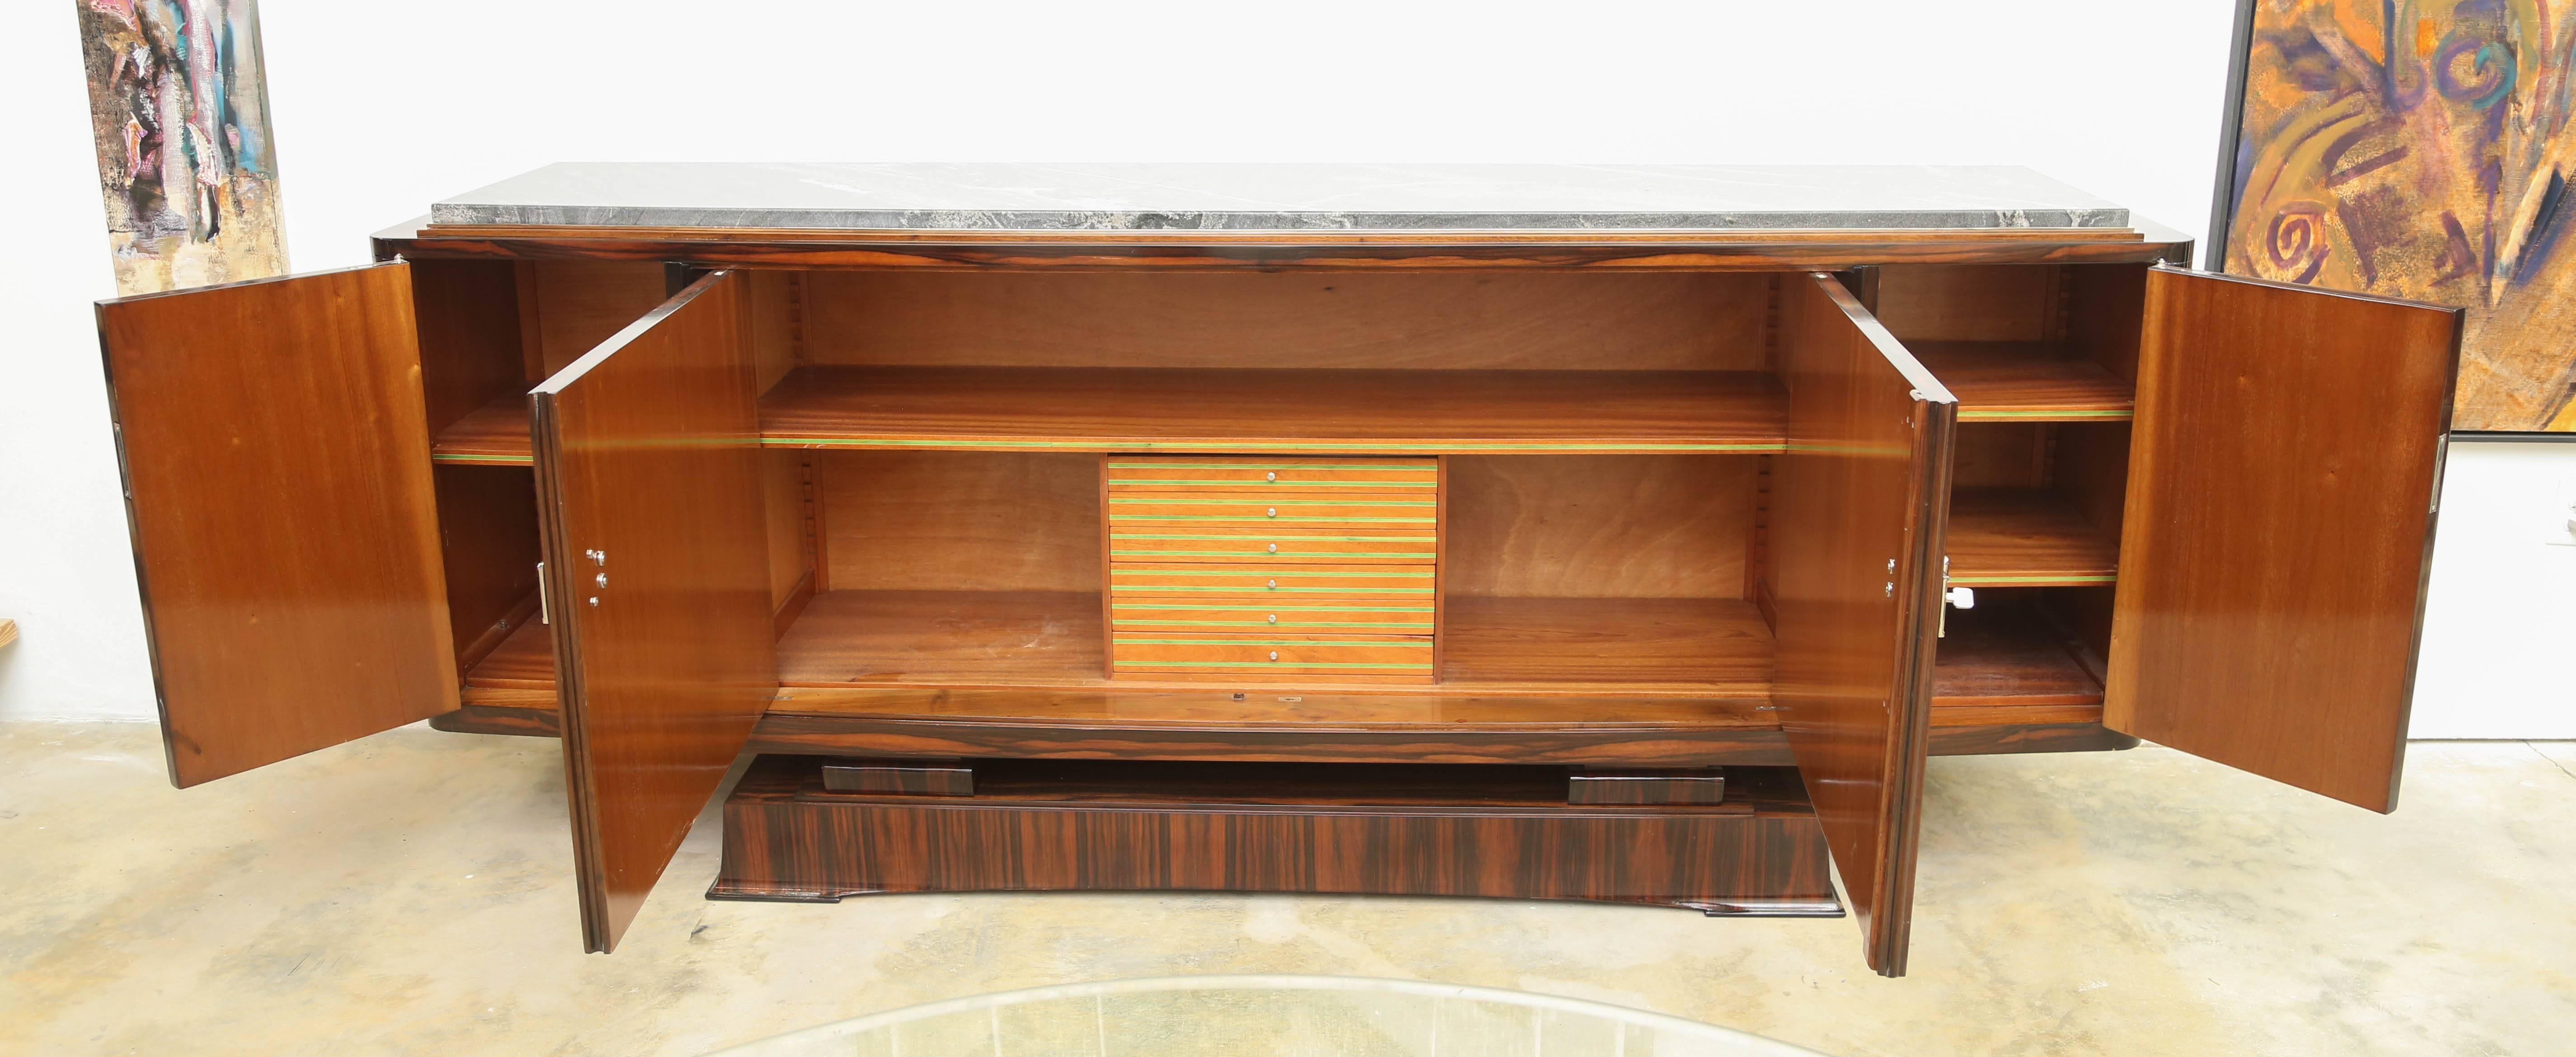 Mid-20th Century French Art Deco Exceptional Macassar Sideboard